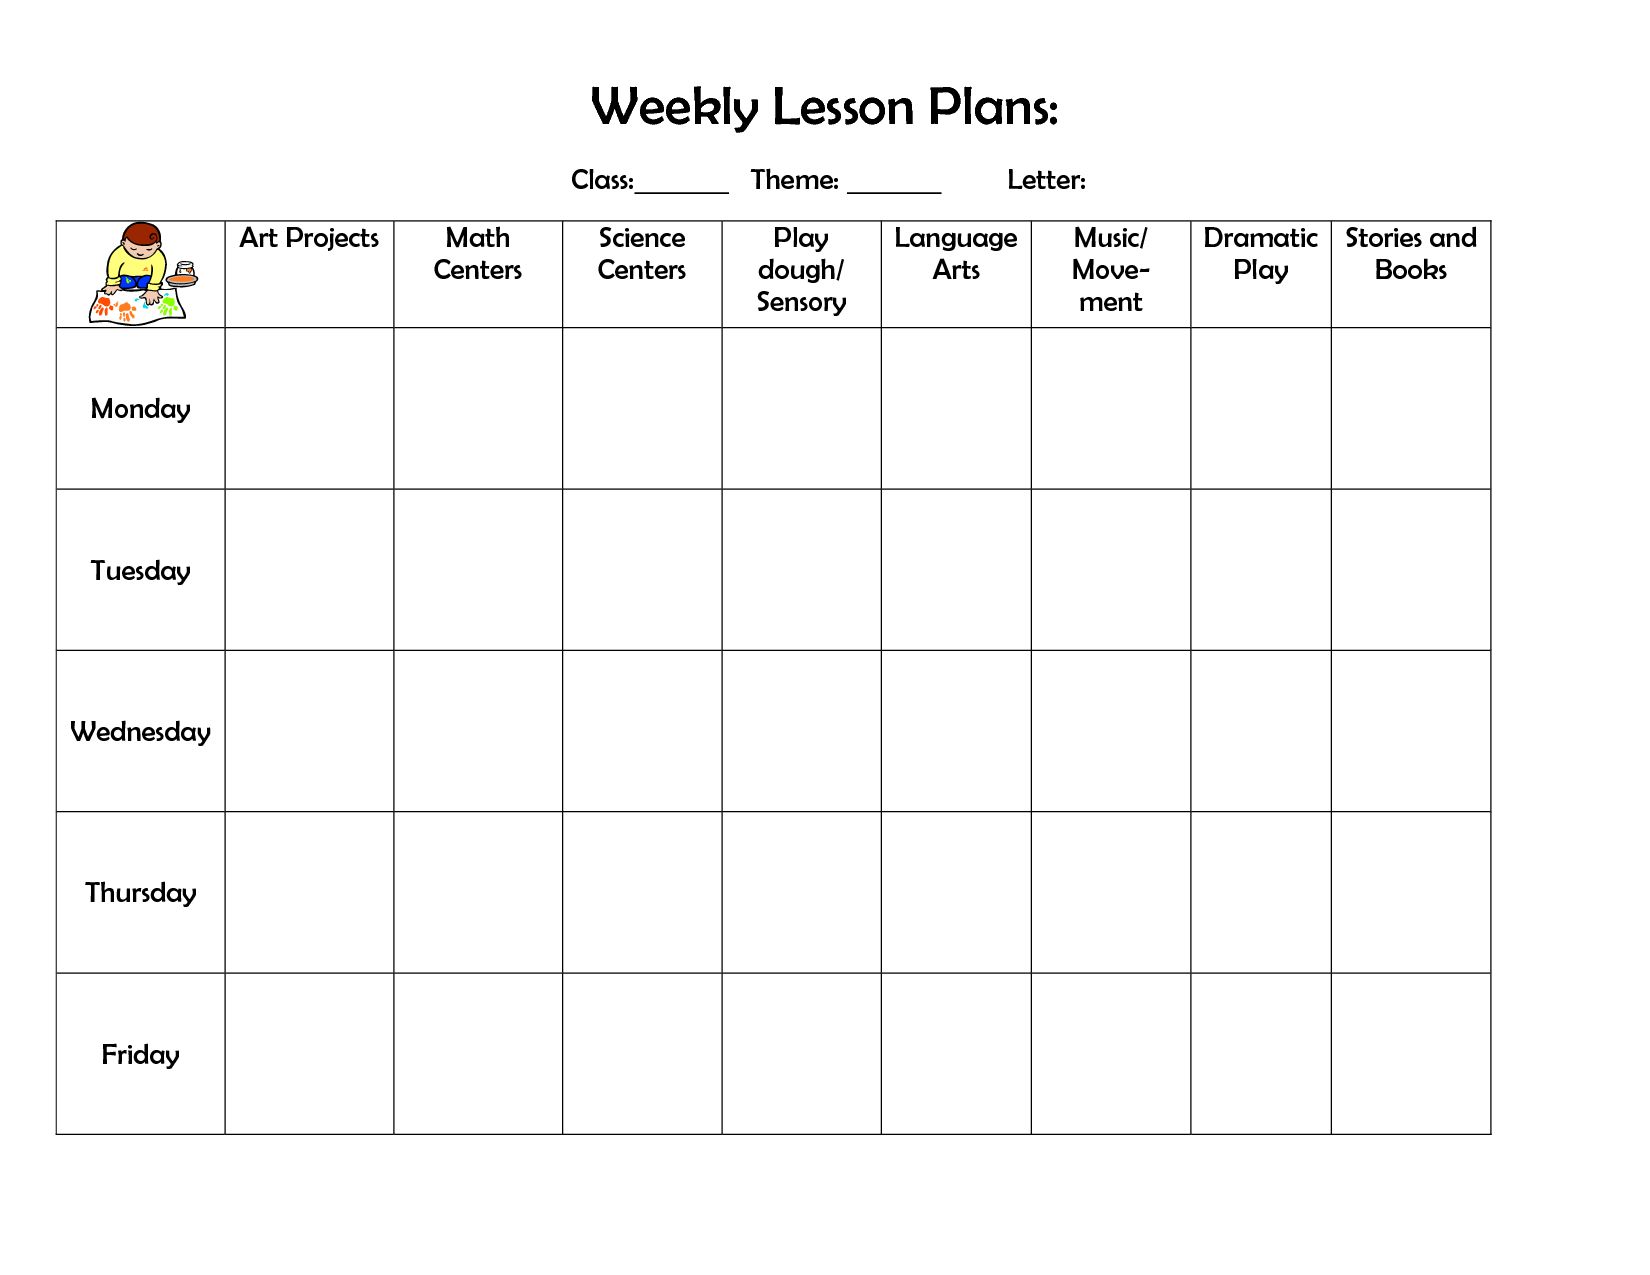 Free Lesson Plan Templates- Word, Pdf Format Download? (With